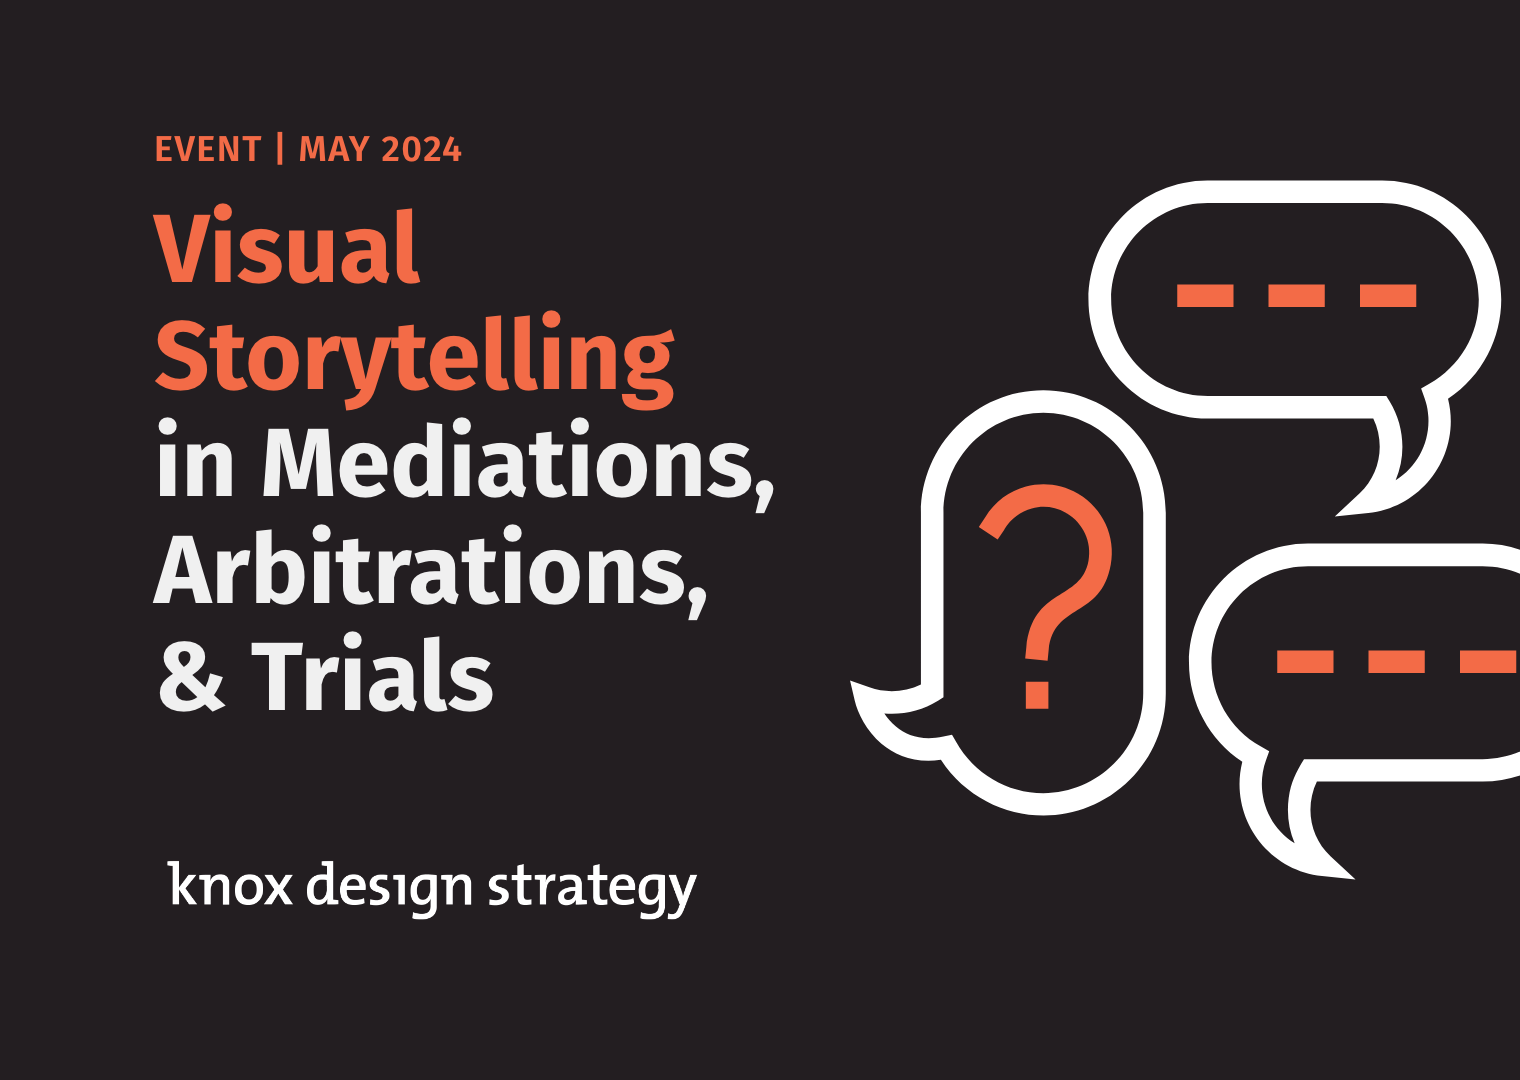 Image about Visual Storytelling Event Thumbnail